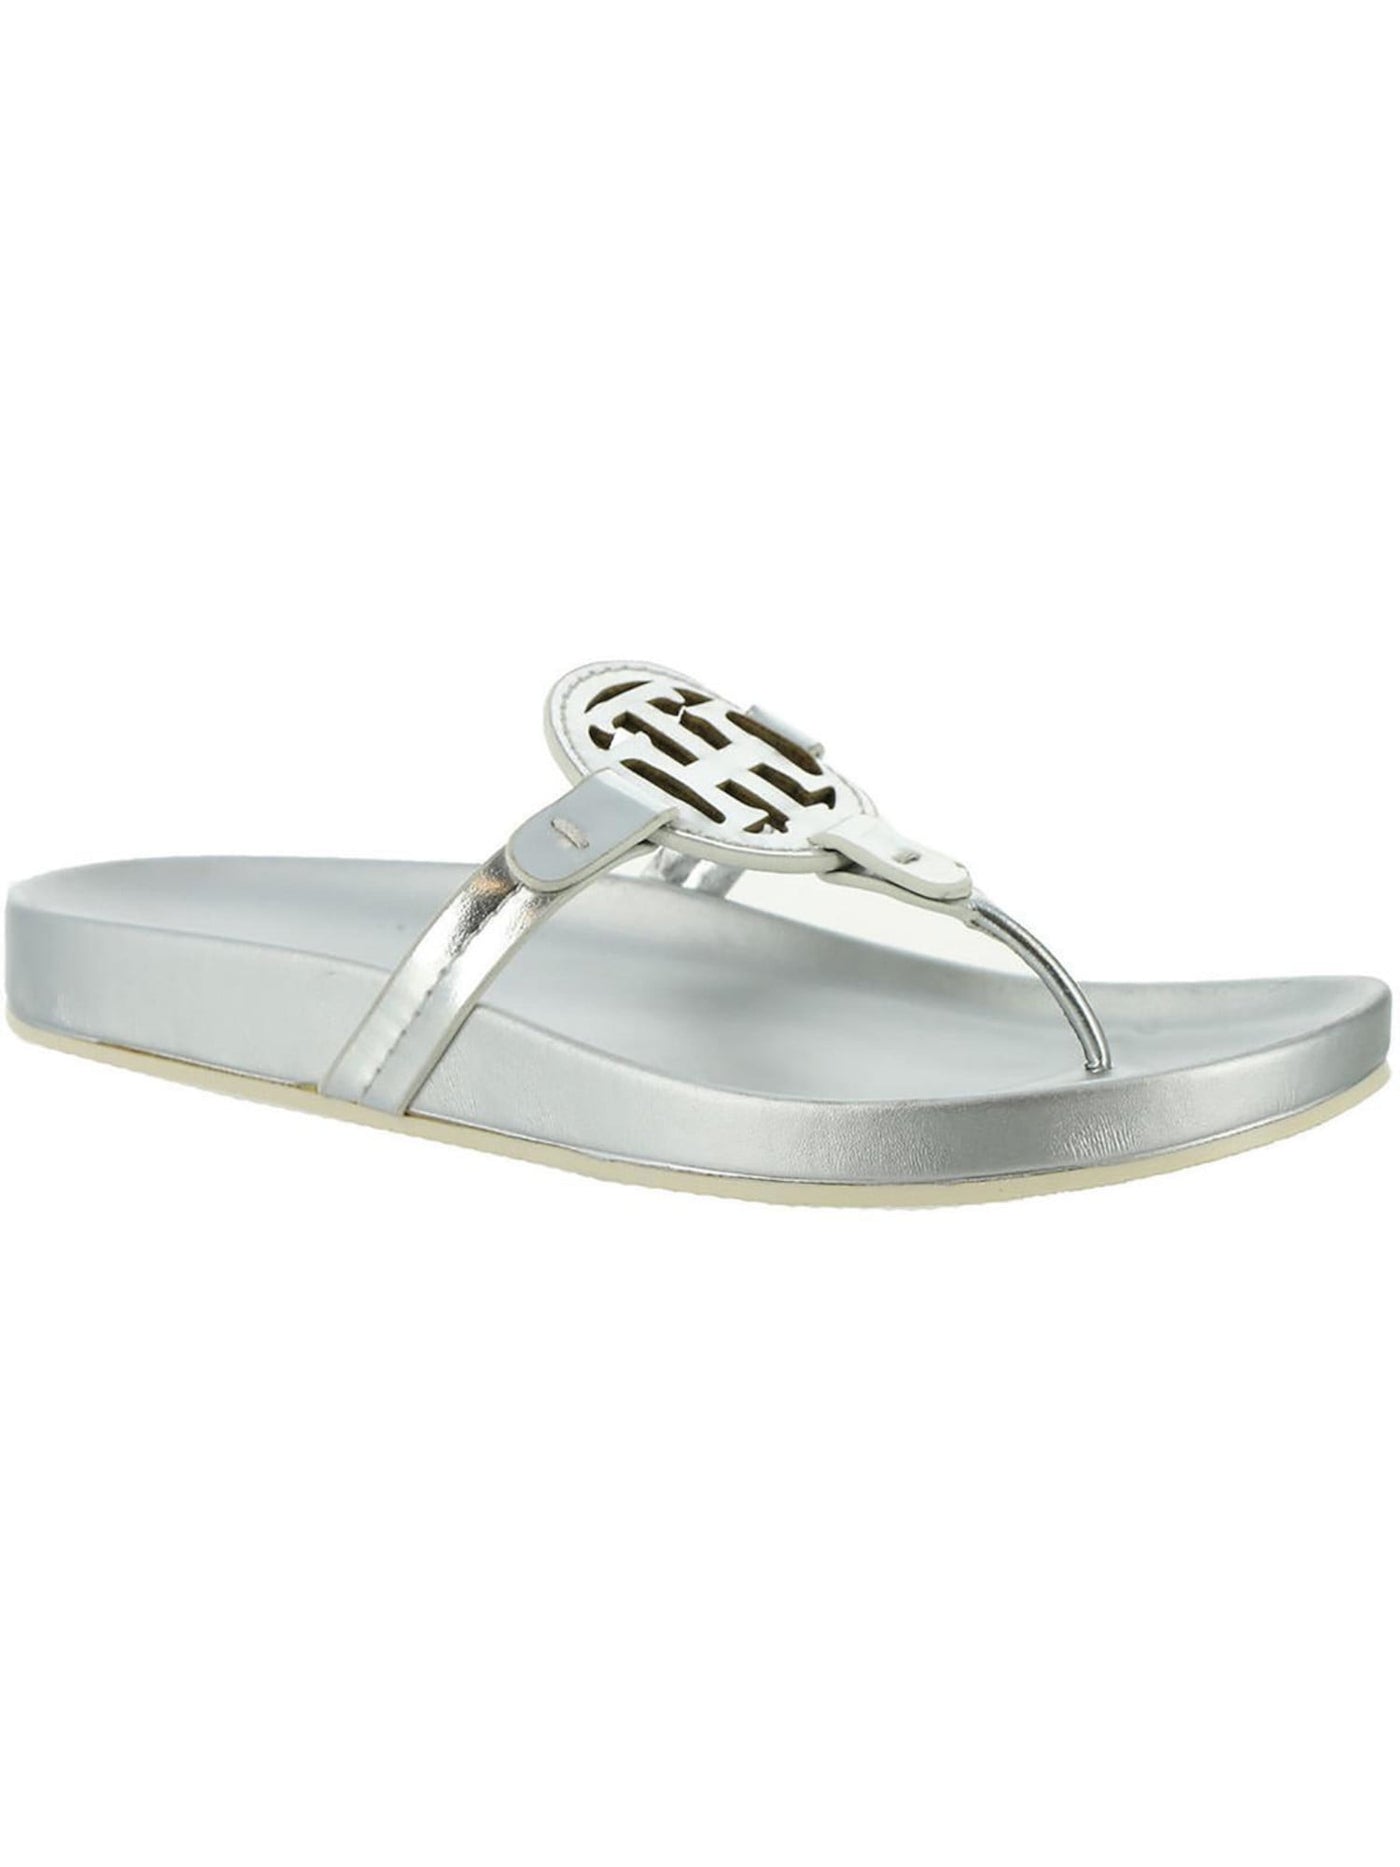 TOMMY HILFIGER Womens Silver Cut Out Comfort Relina Open Toe Slip On Thong Sandals Shoes 5.5 M